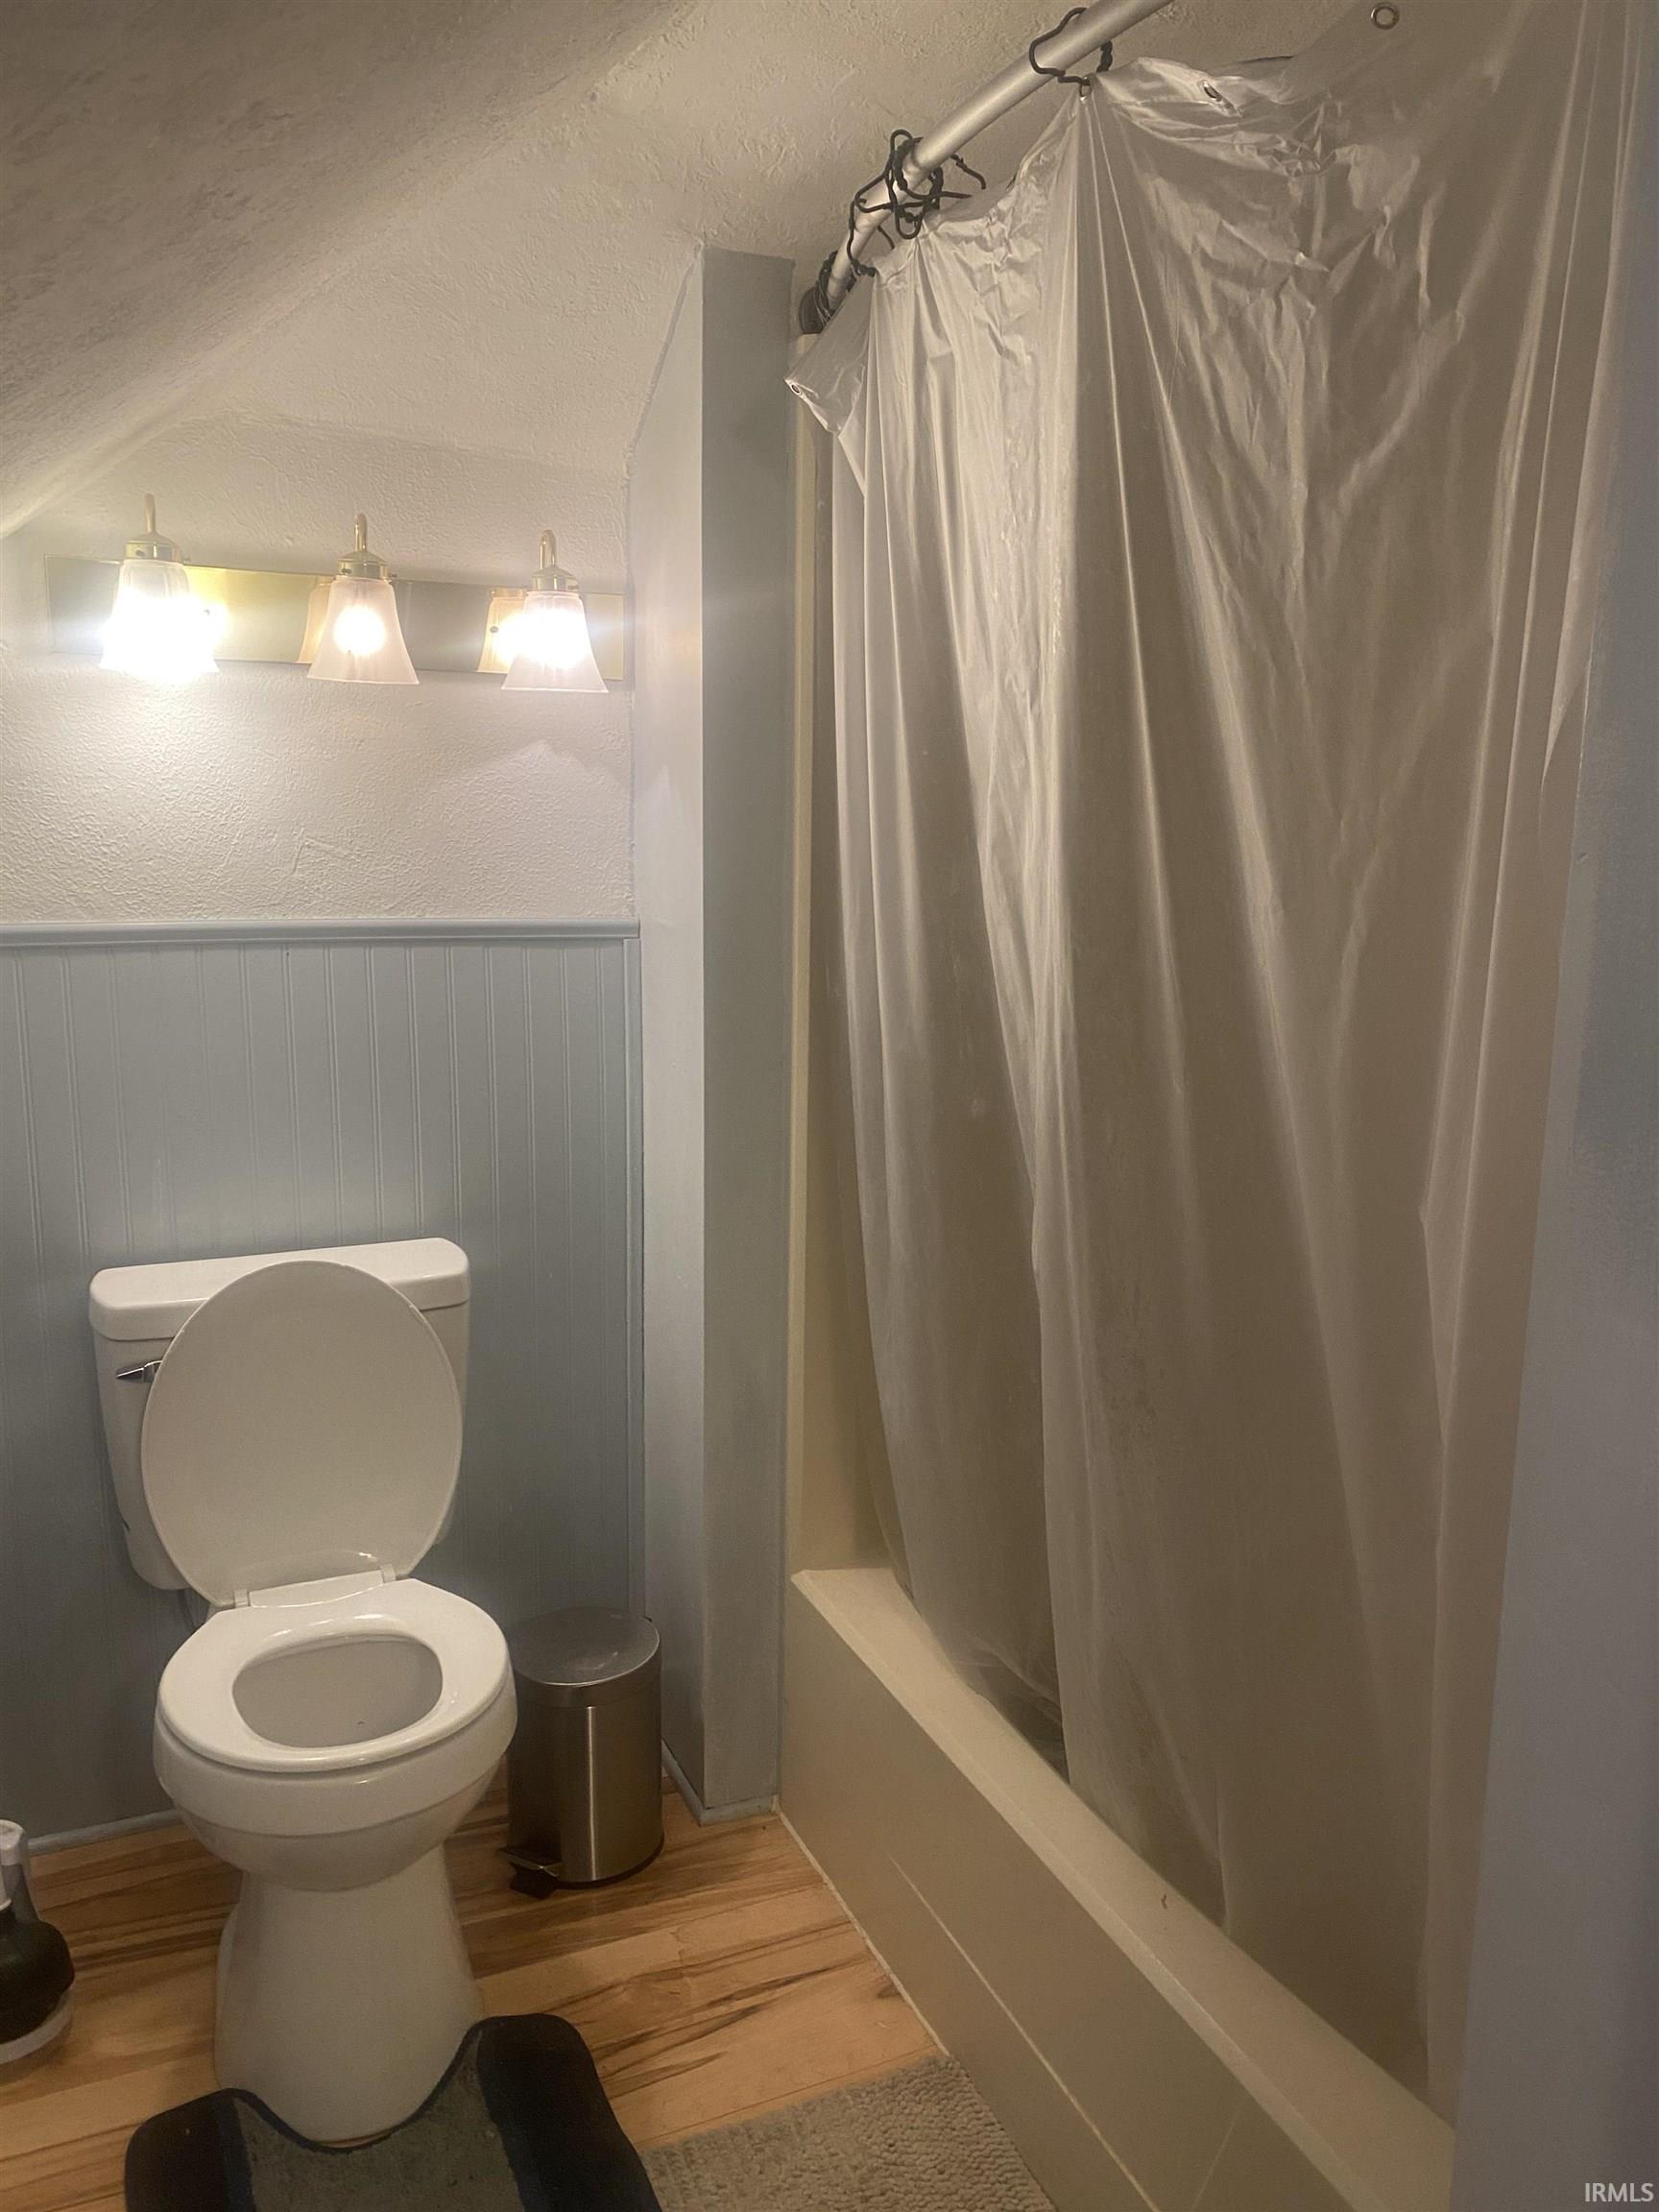 Upstairs, two bedroom apartment bathroom